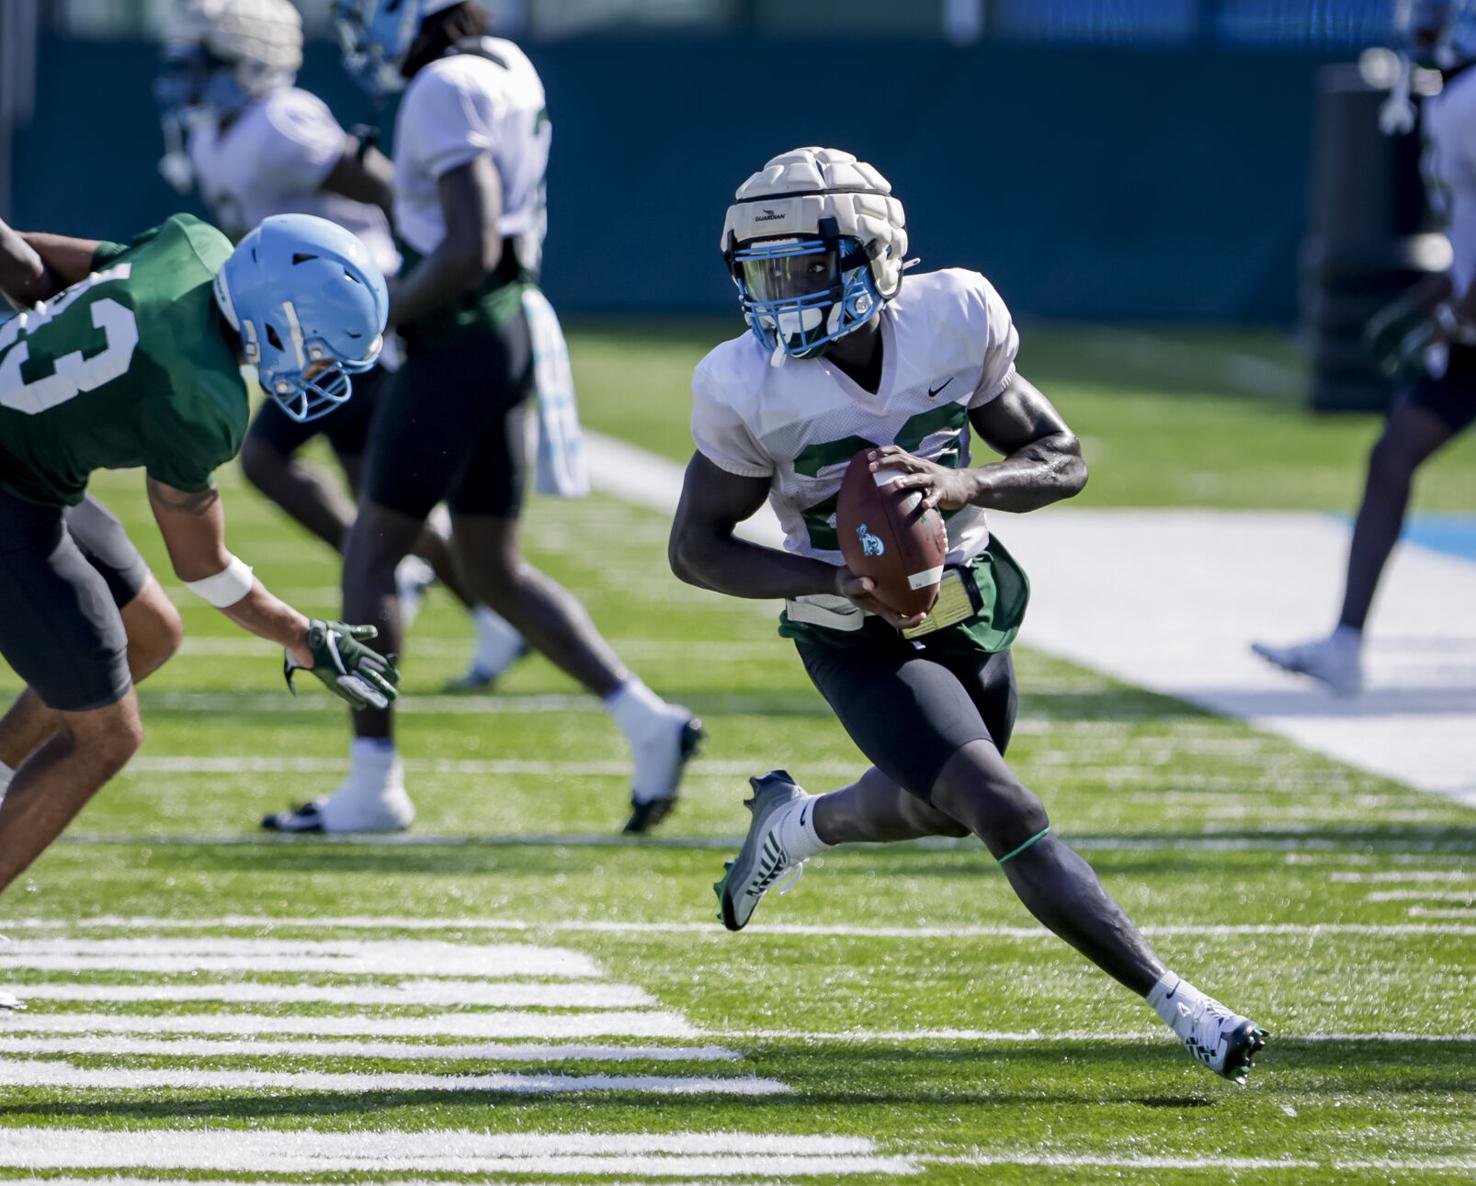 The season is near Evaluating Tulane's depth chart by position